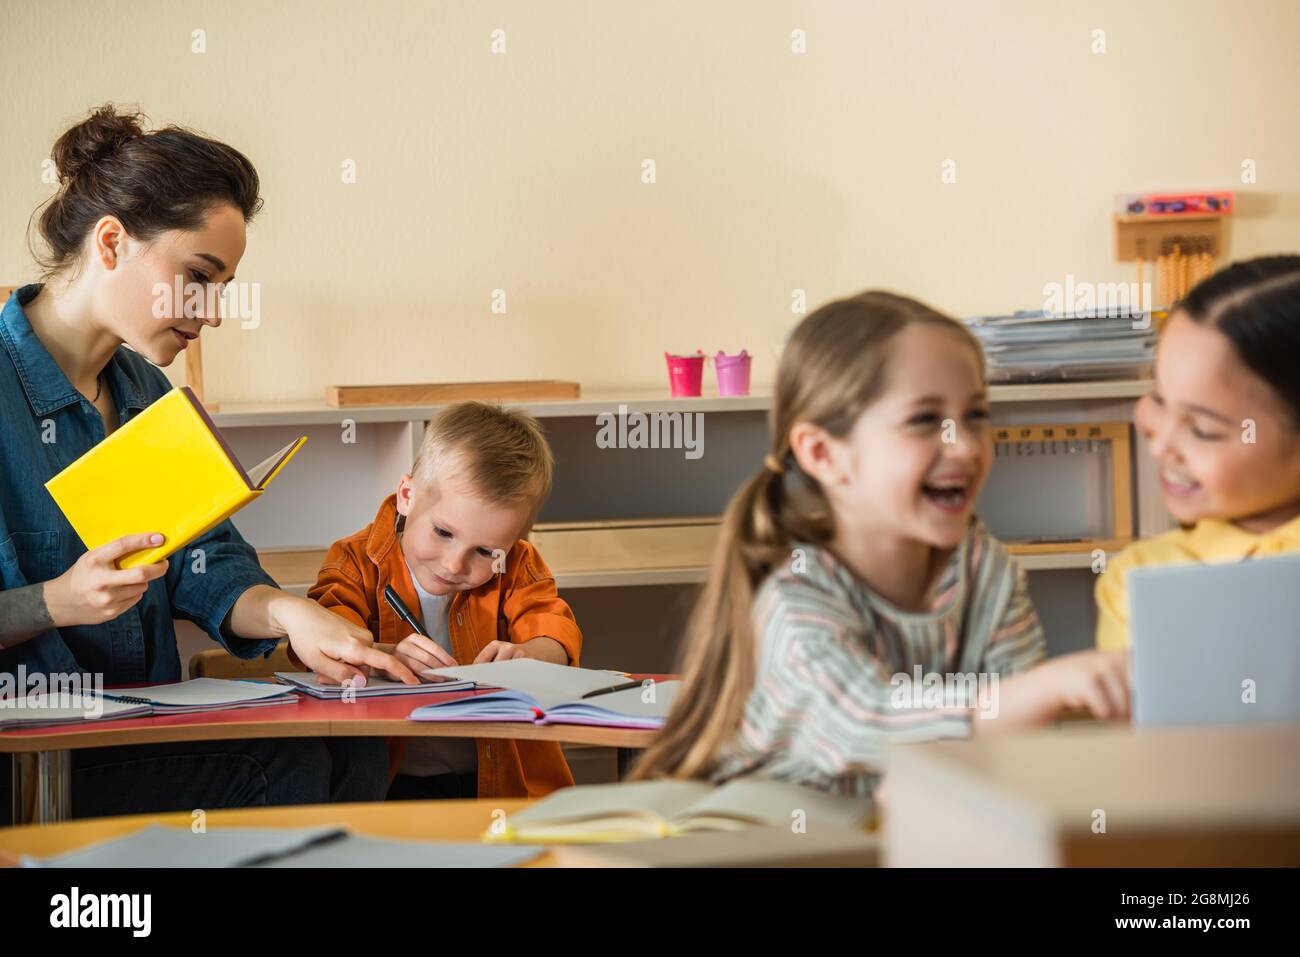 teacher pointing at notebook near writing boy while interracial girls laughing on blurred foreground Stock Photo